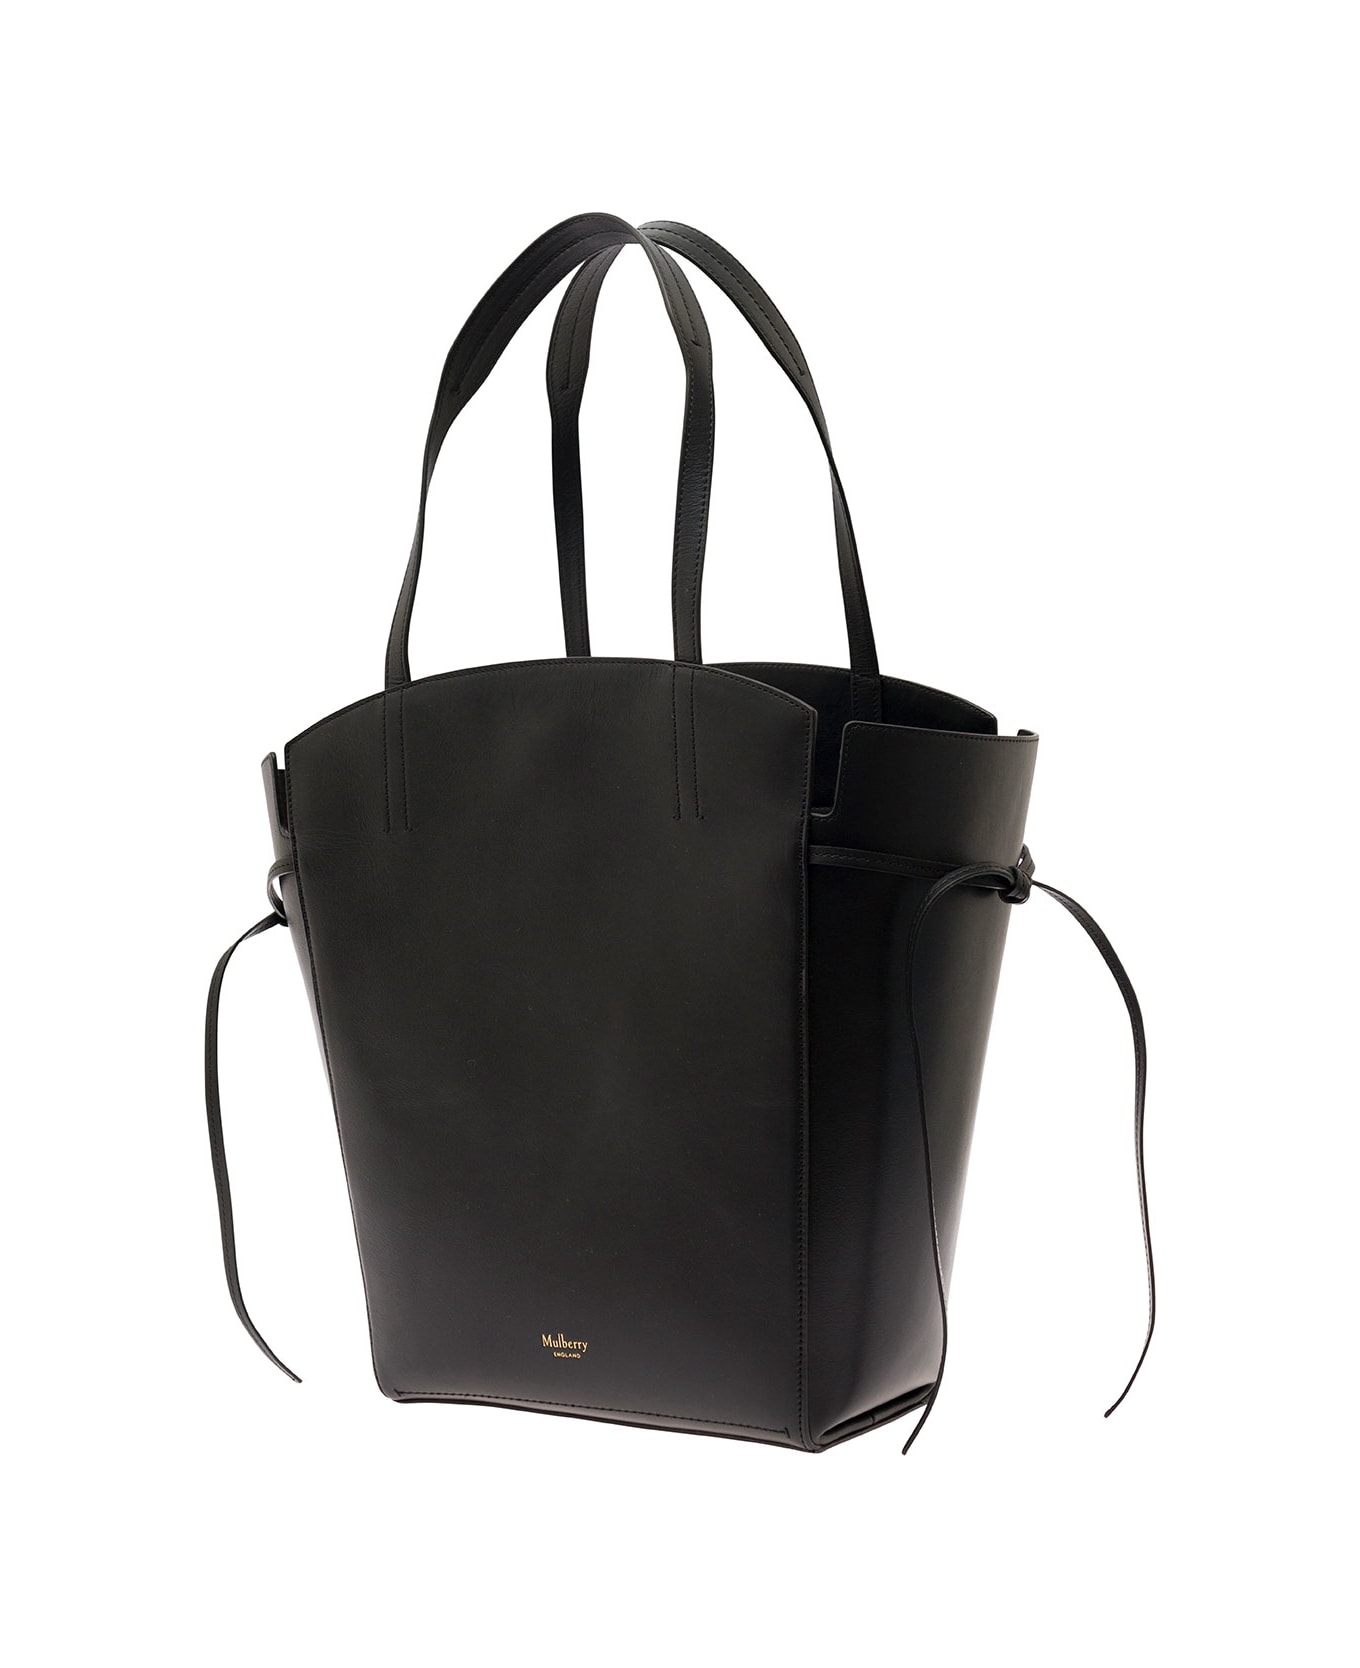 Mulberry 'clovelly' Black Shoulder Bag With Laminated Logo In Smooth Leather Woman - Black トートバッグ